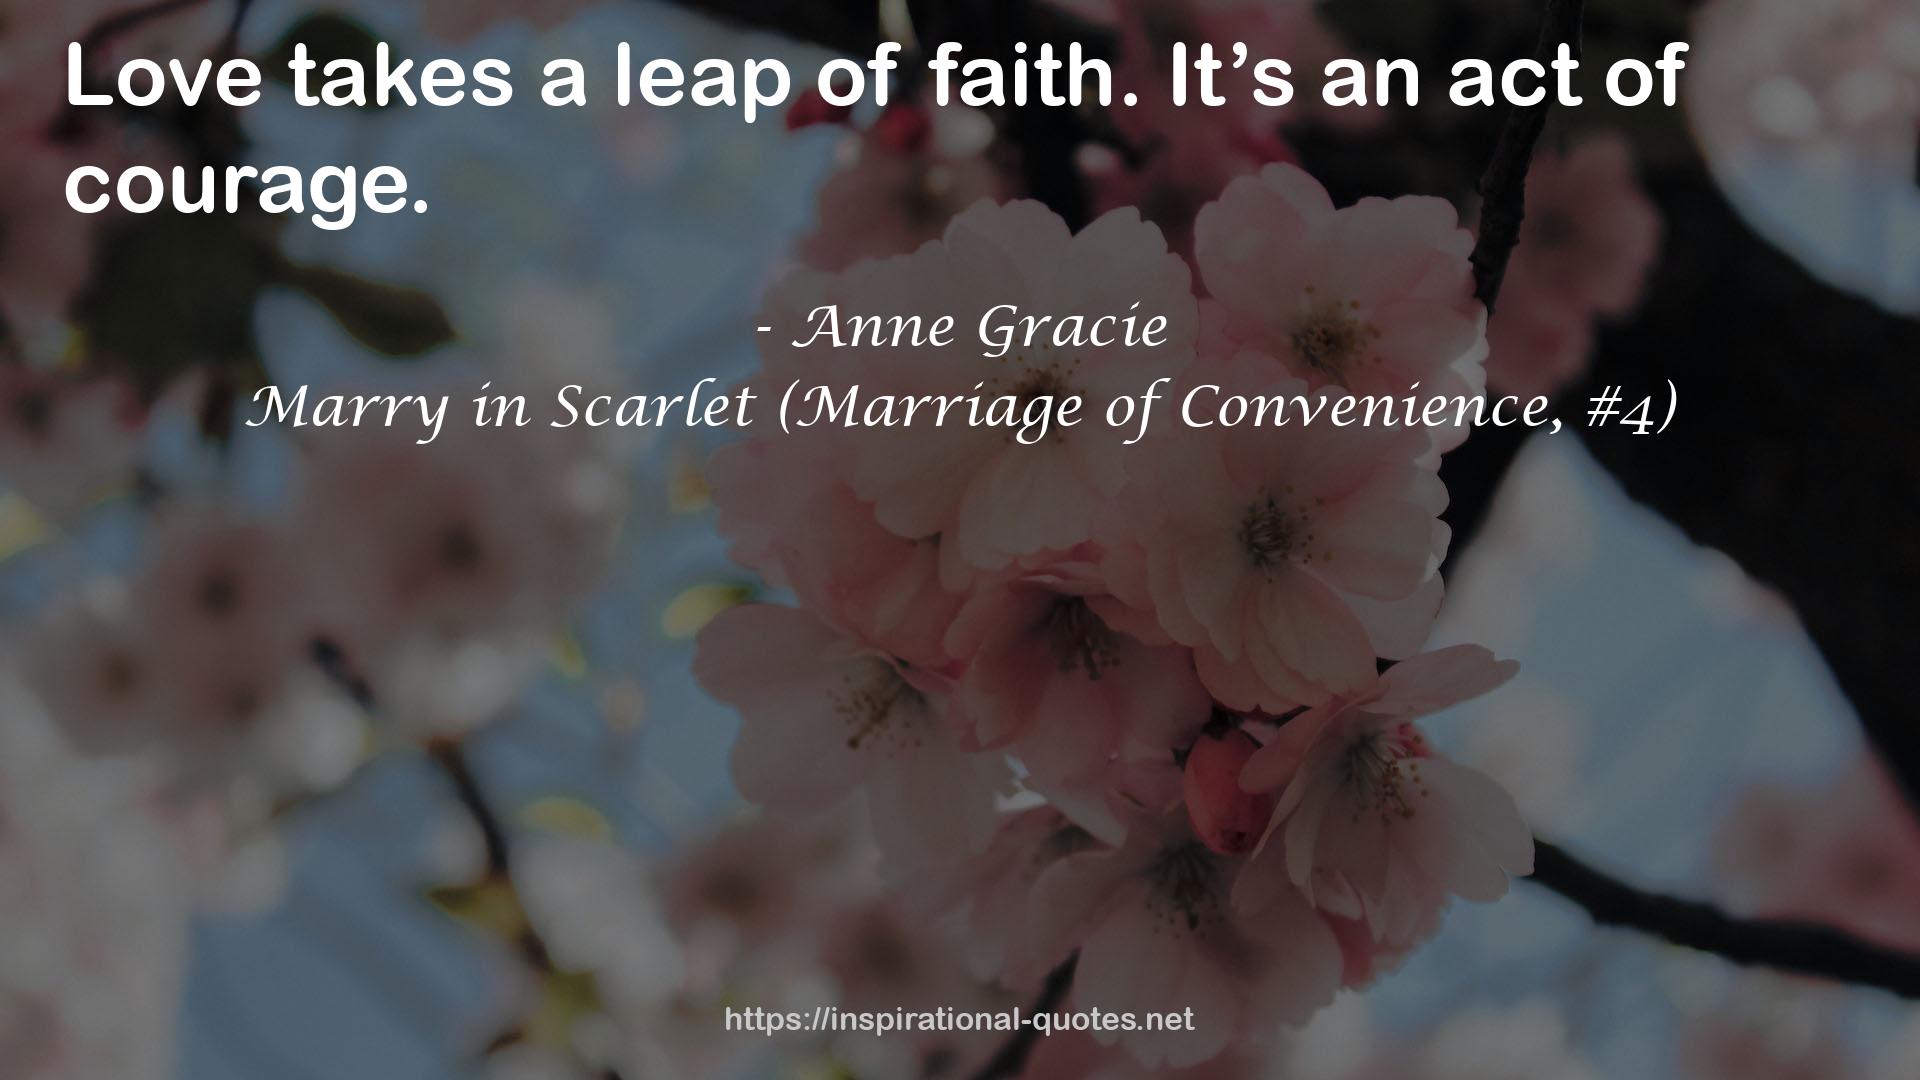 Marry in Scarlet (Marriage of Convenience, #4) QUOTES